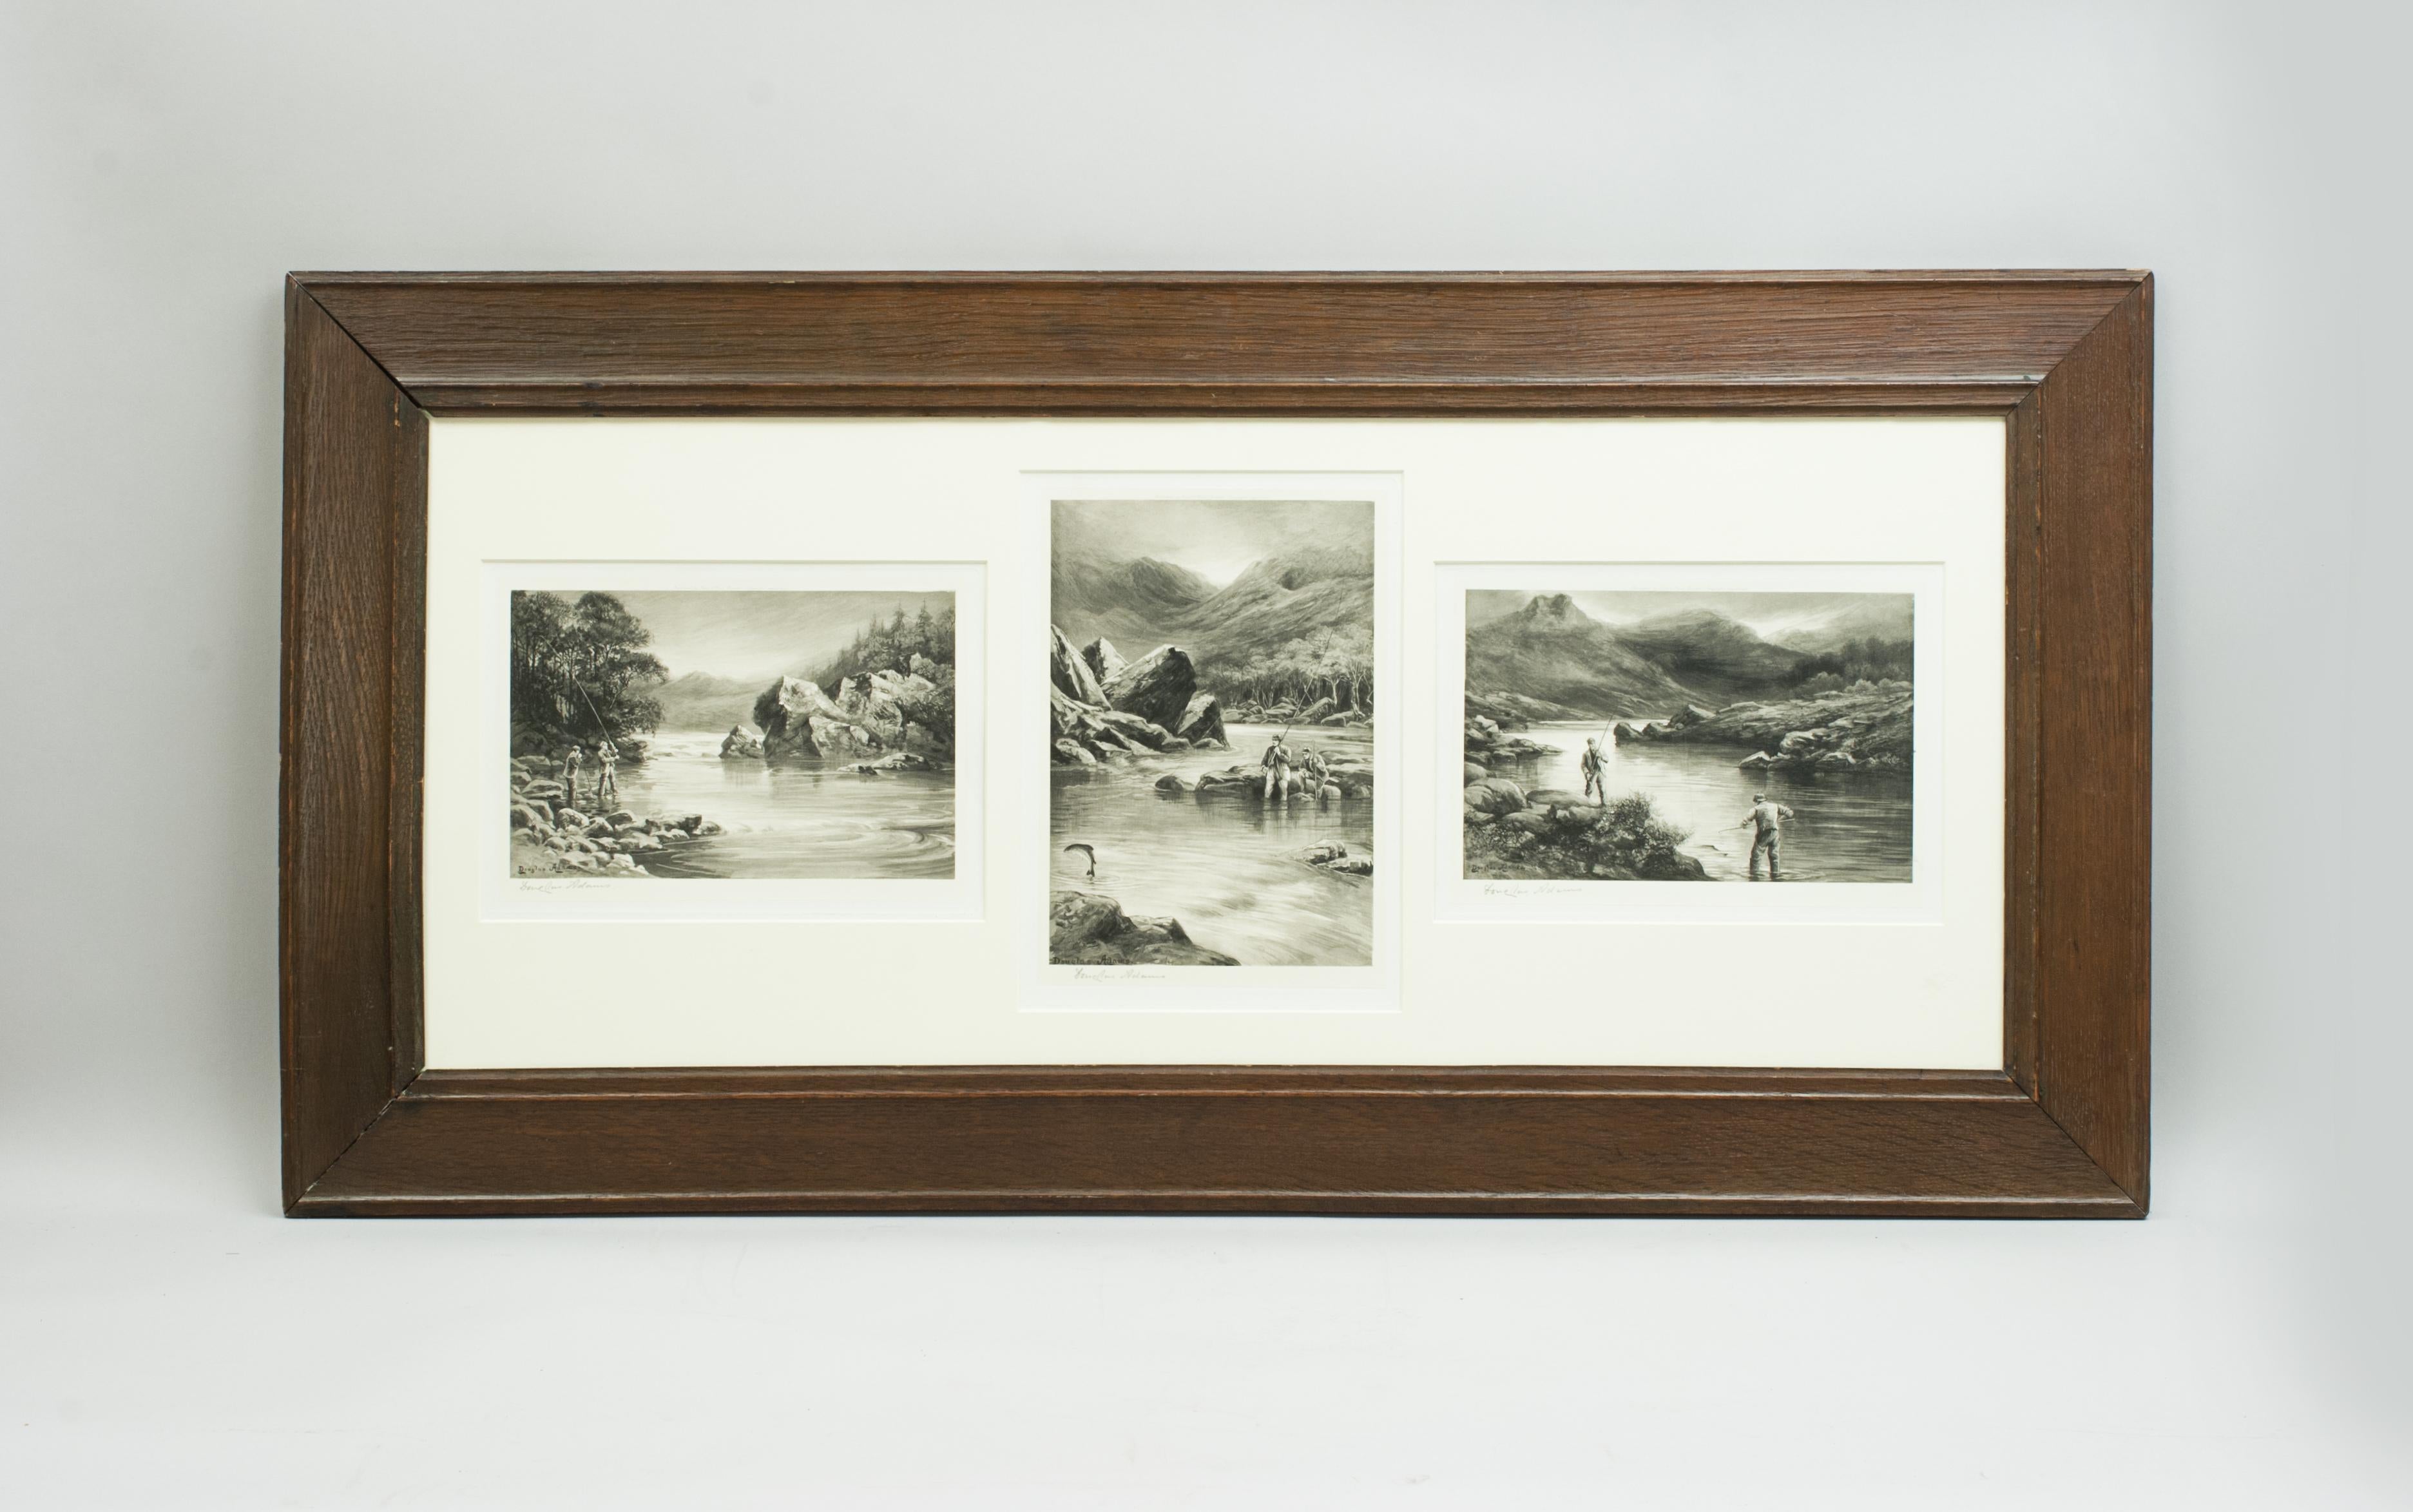 Three salmon fishing pictures by Douglas Adams.
A triple aperture mount with salmon fishing scenes by Douglas Adams. The three photogravures are signed by the artist and are in the original old oak frame. Two of the pictures are landscape in